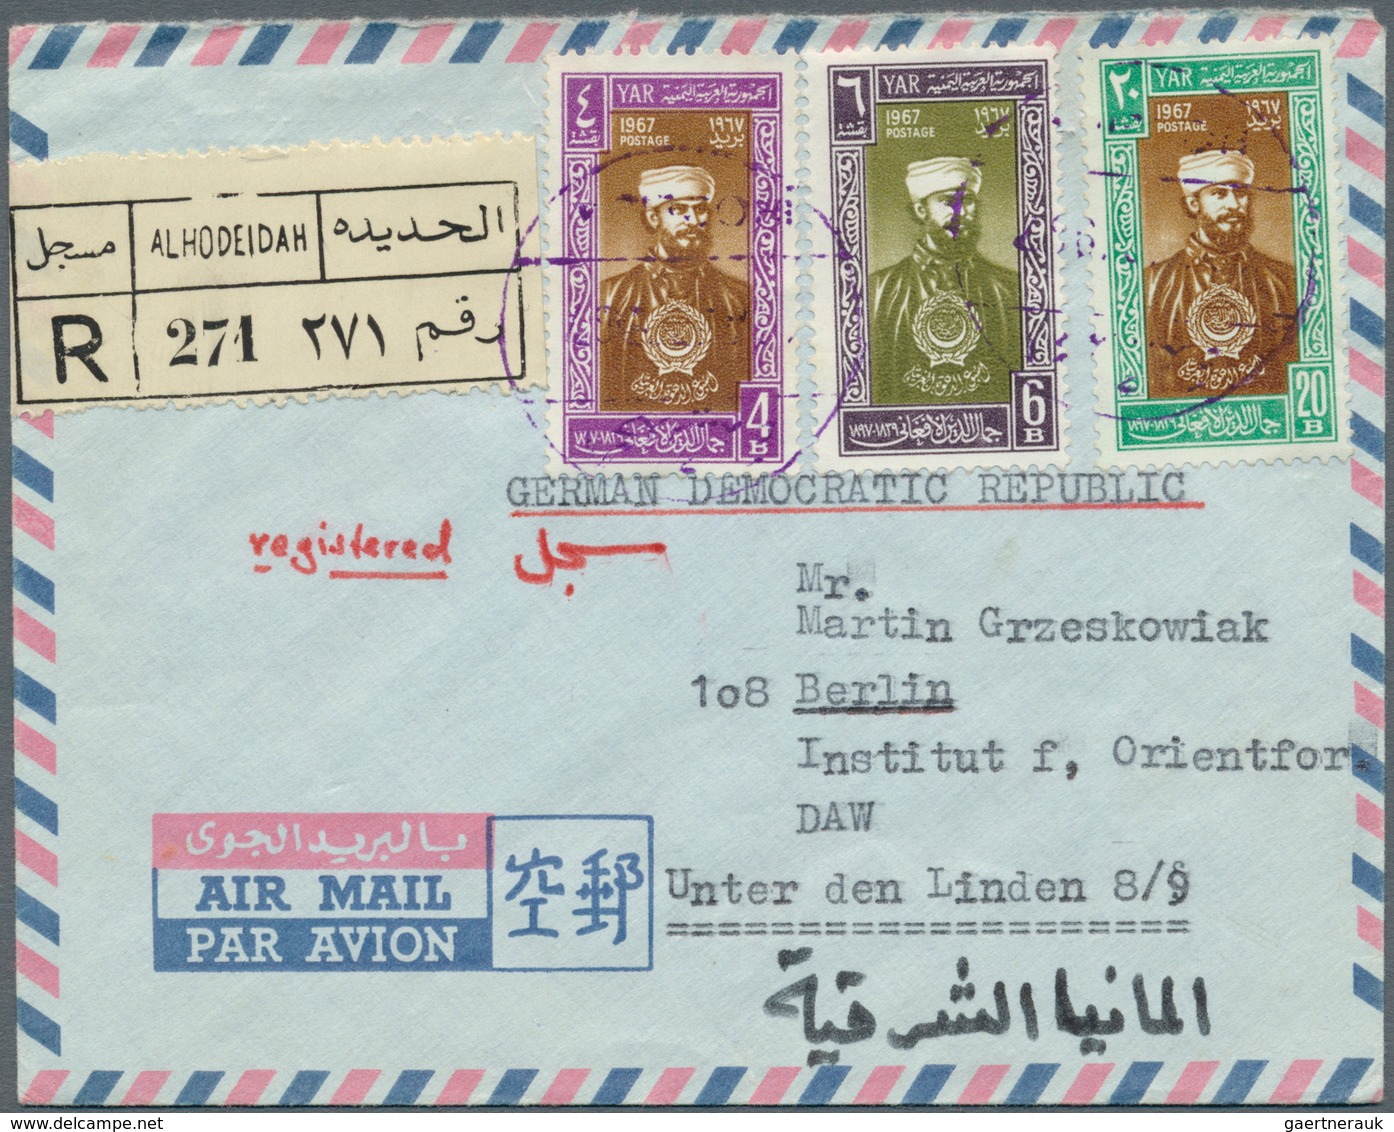 Jemen: 1935/80 (ca.), Lot Of 51 Comercial Covers, Many Airmails, Some Interesting Cancellations, Mos - Yémen